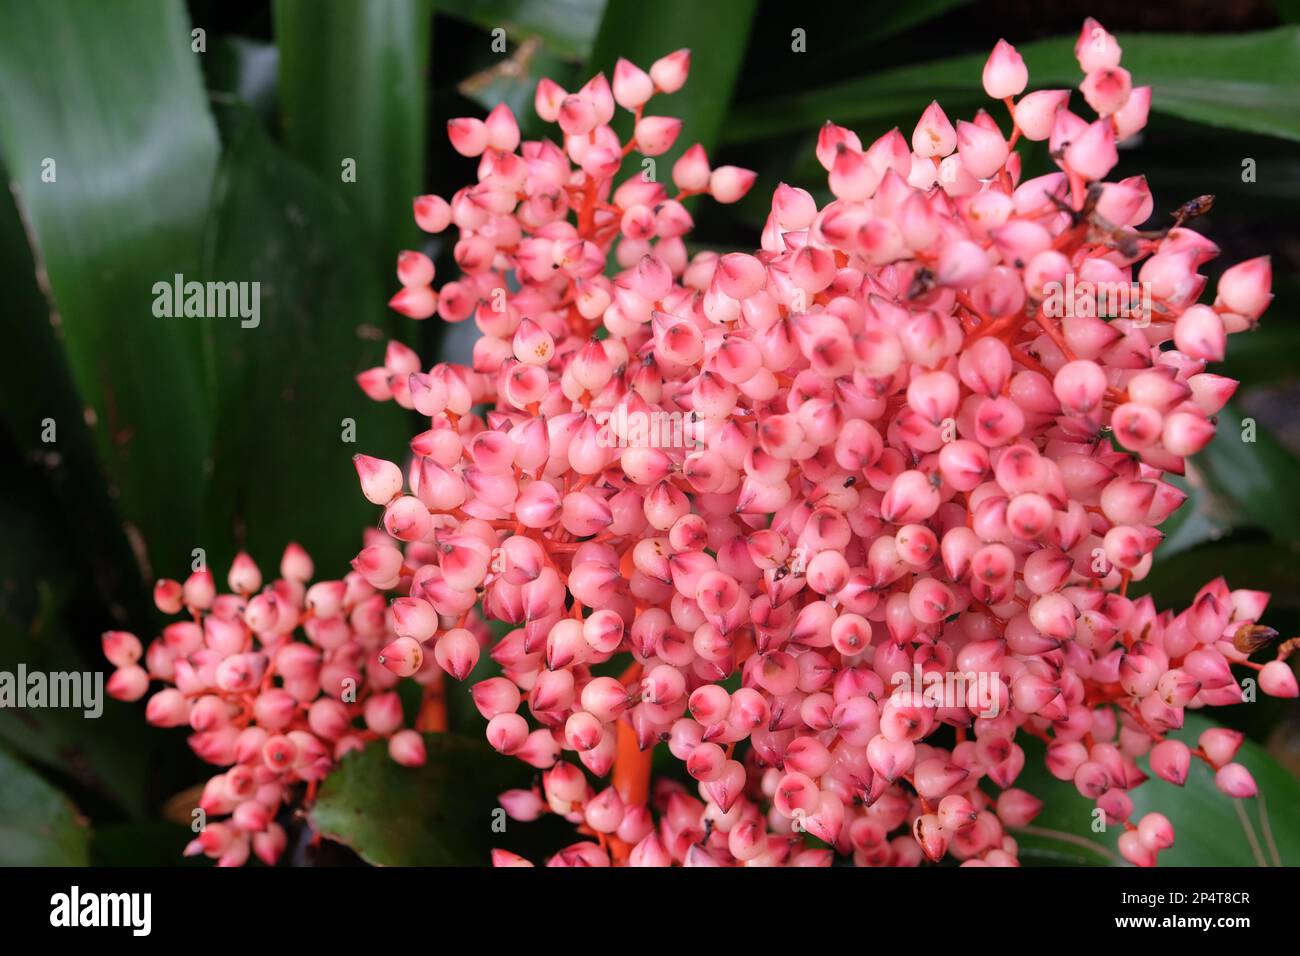 The pink berries of the Aechmea ramosa plant. Stock Photo